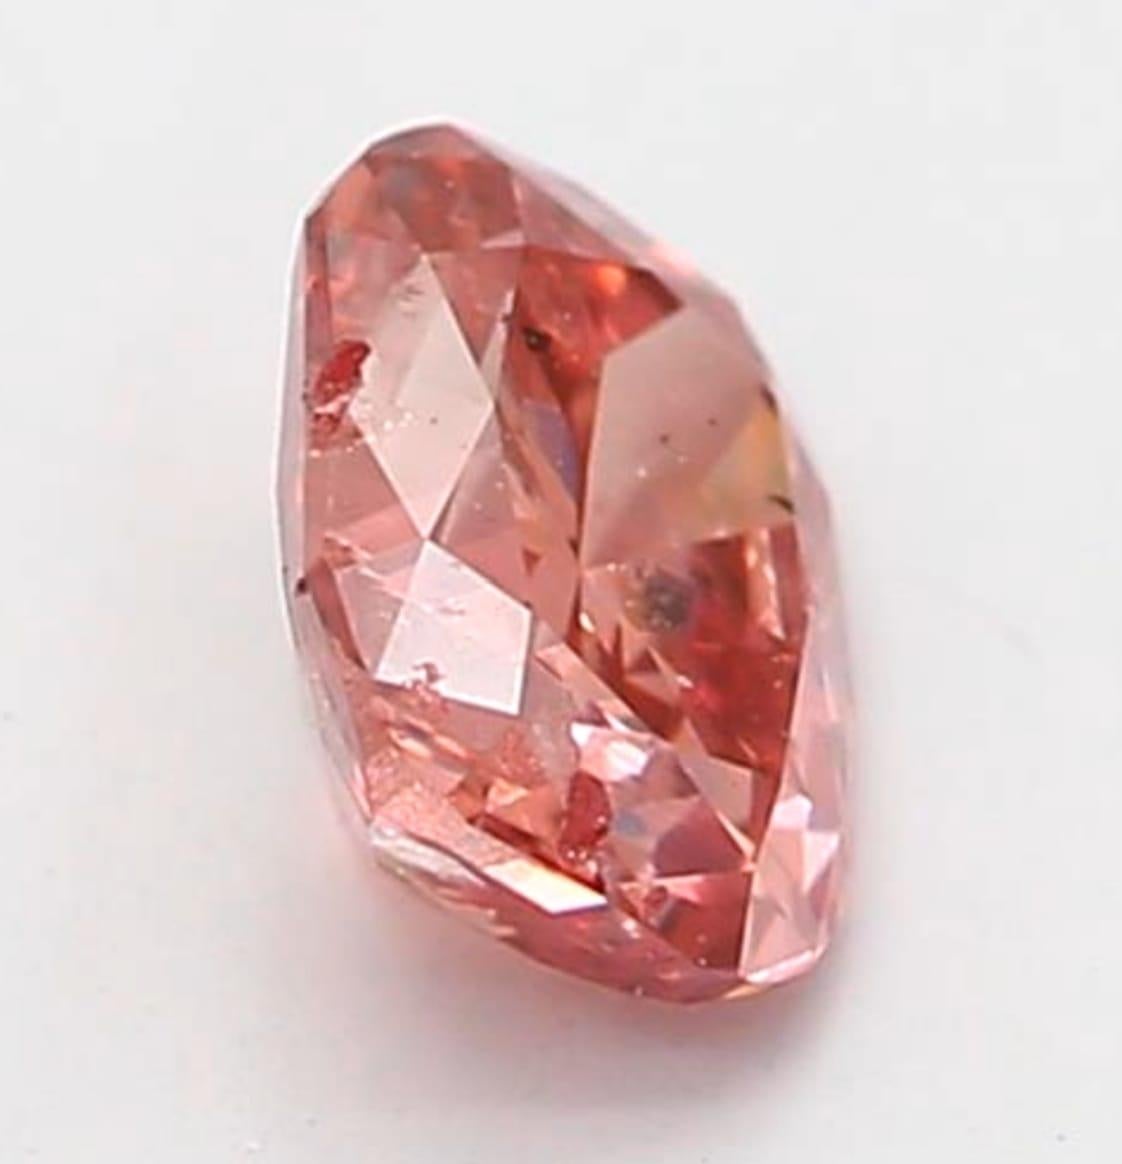 0.24 Carat Fancy Deep Orangy Pink Round Cut Diamond GIA Certified For Sale 2